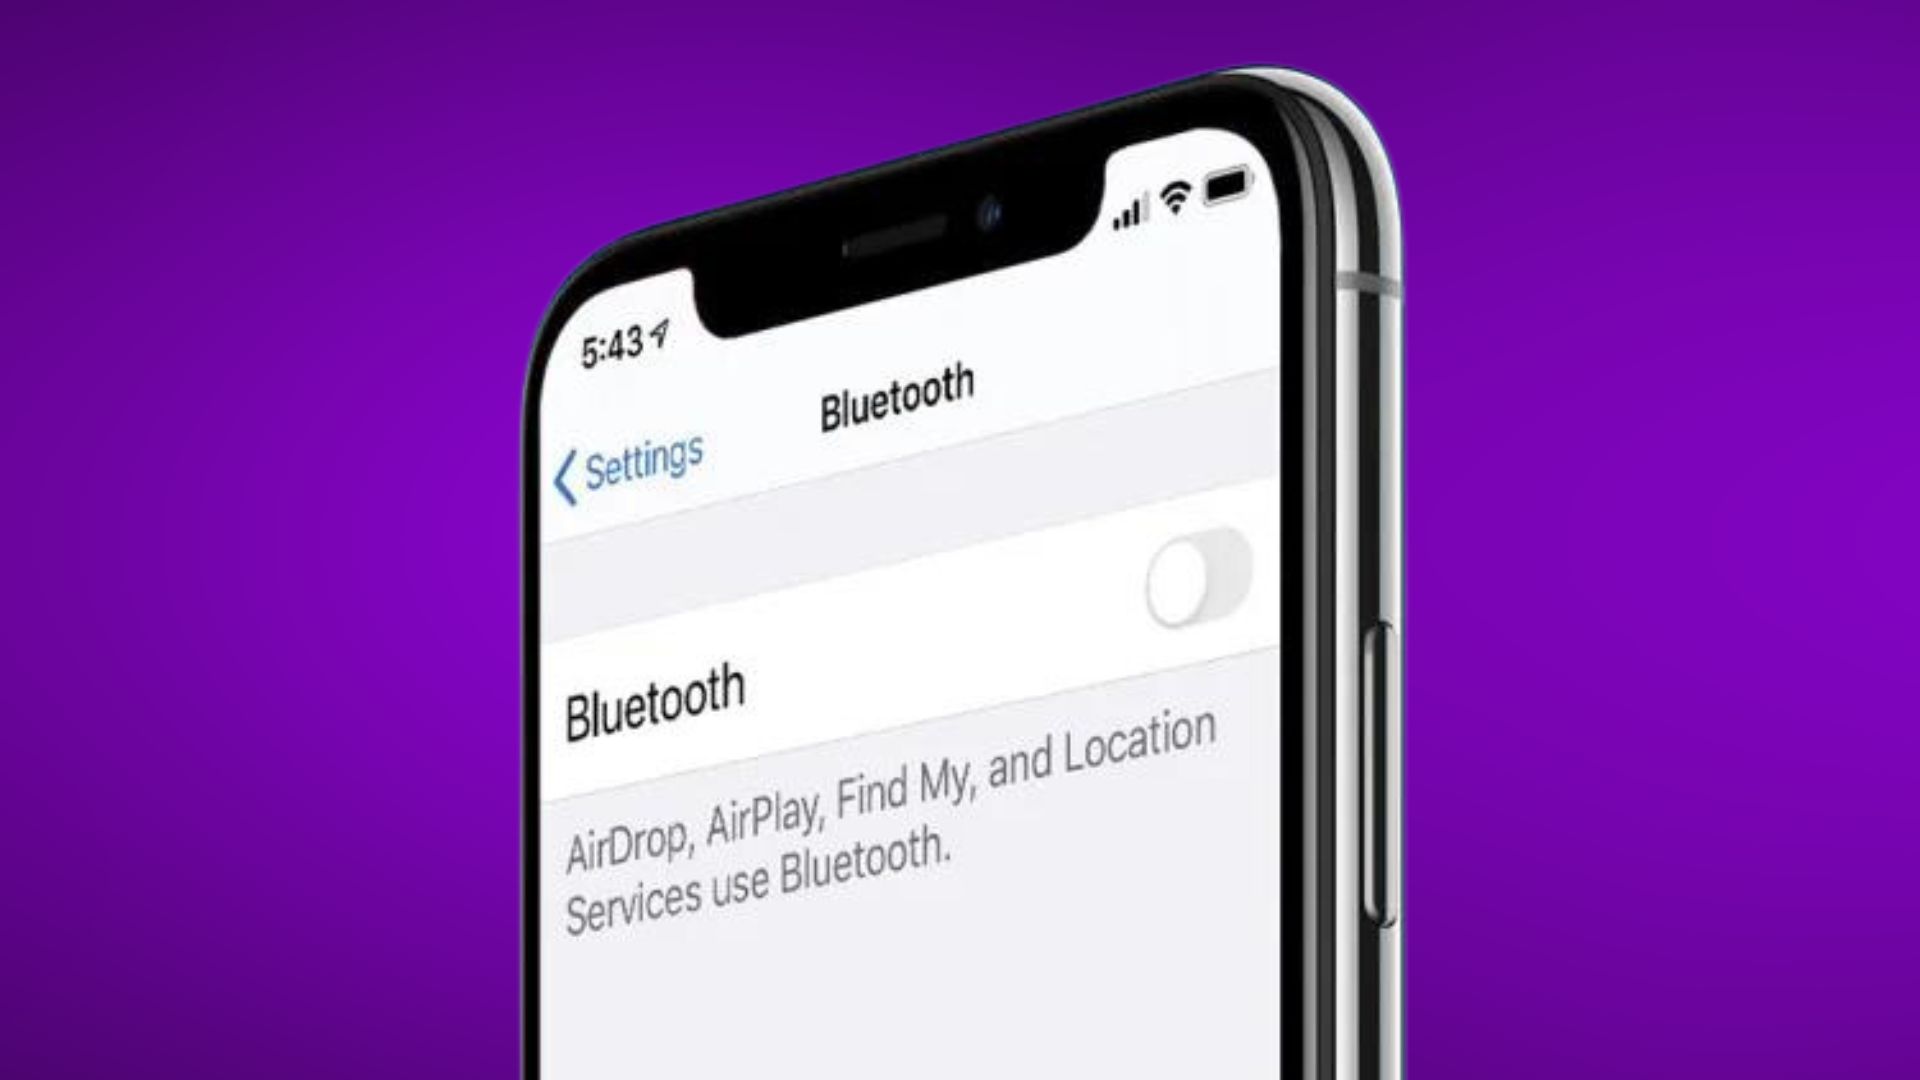 Toggle Bluetooth Off and On